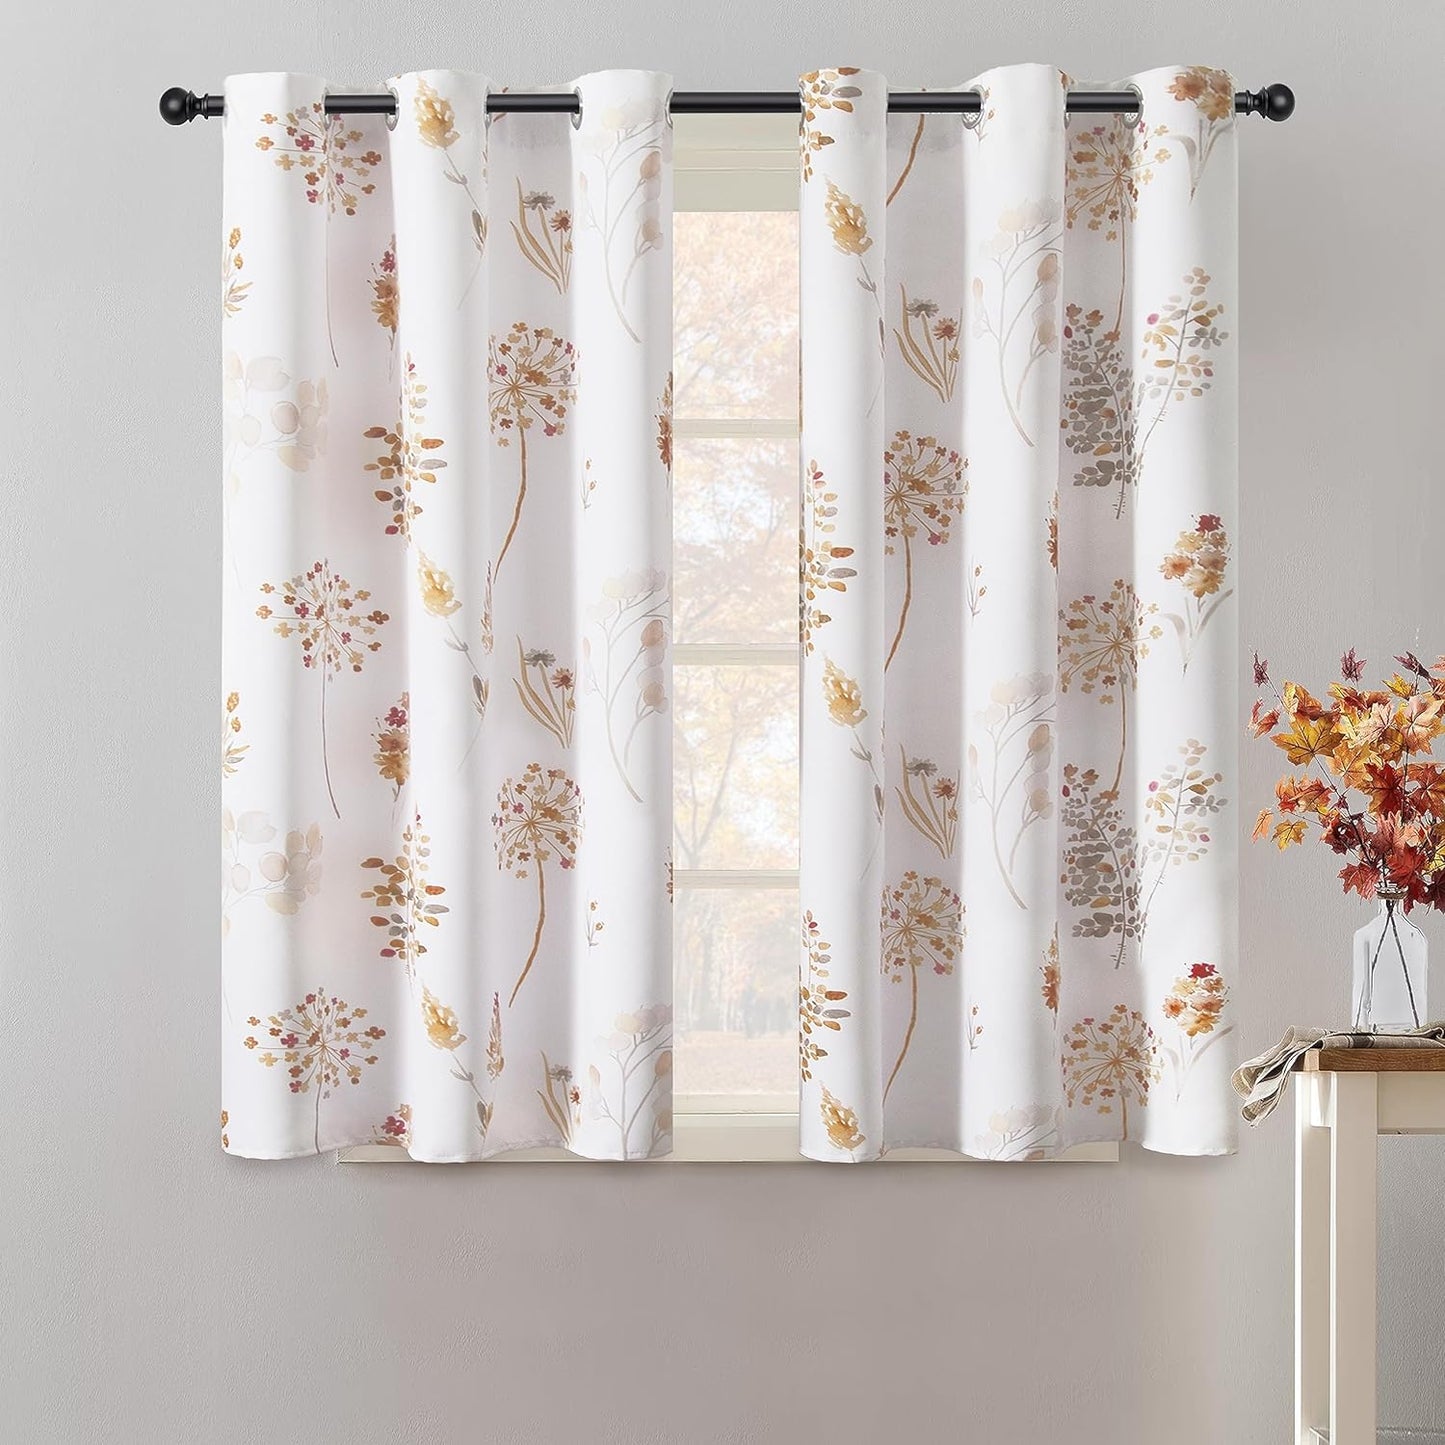 XTMYI 63 Inch Length Sage Green Window Curtains for Bedroom 2 Panels,Room Darkening Watercolor Floral Leaves 80% Blackout Flowered Printed Curtains for Living Room with Grommet,1 Pair Set  XTMYI Rust  Brown 34"X45" 